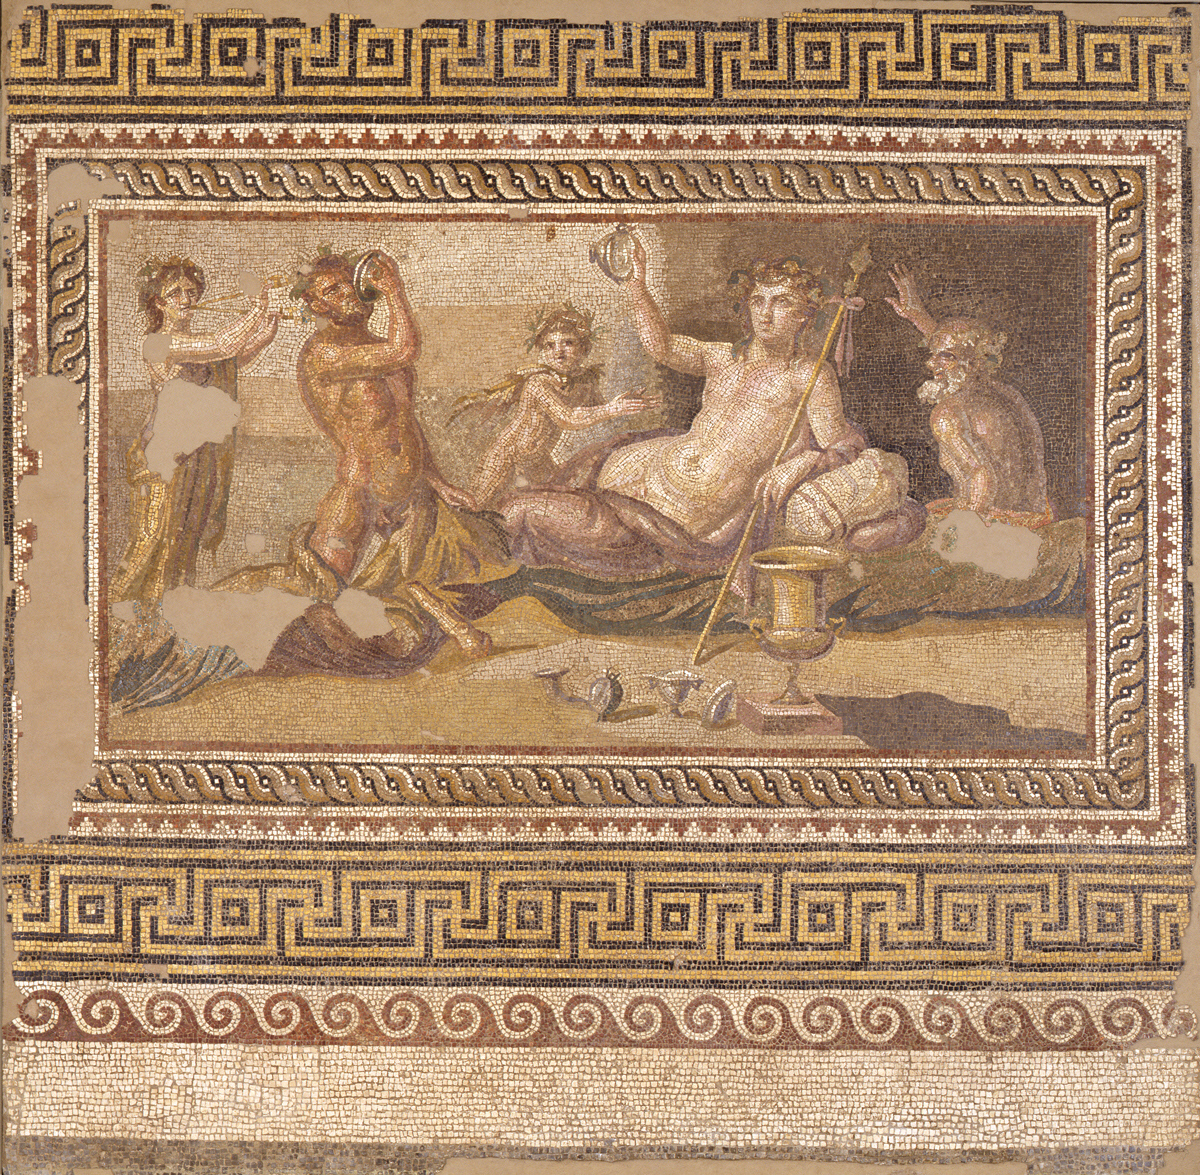 Mosaic drinking competition between Hercules and Bacchus